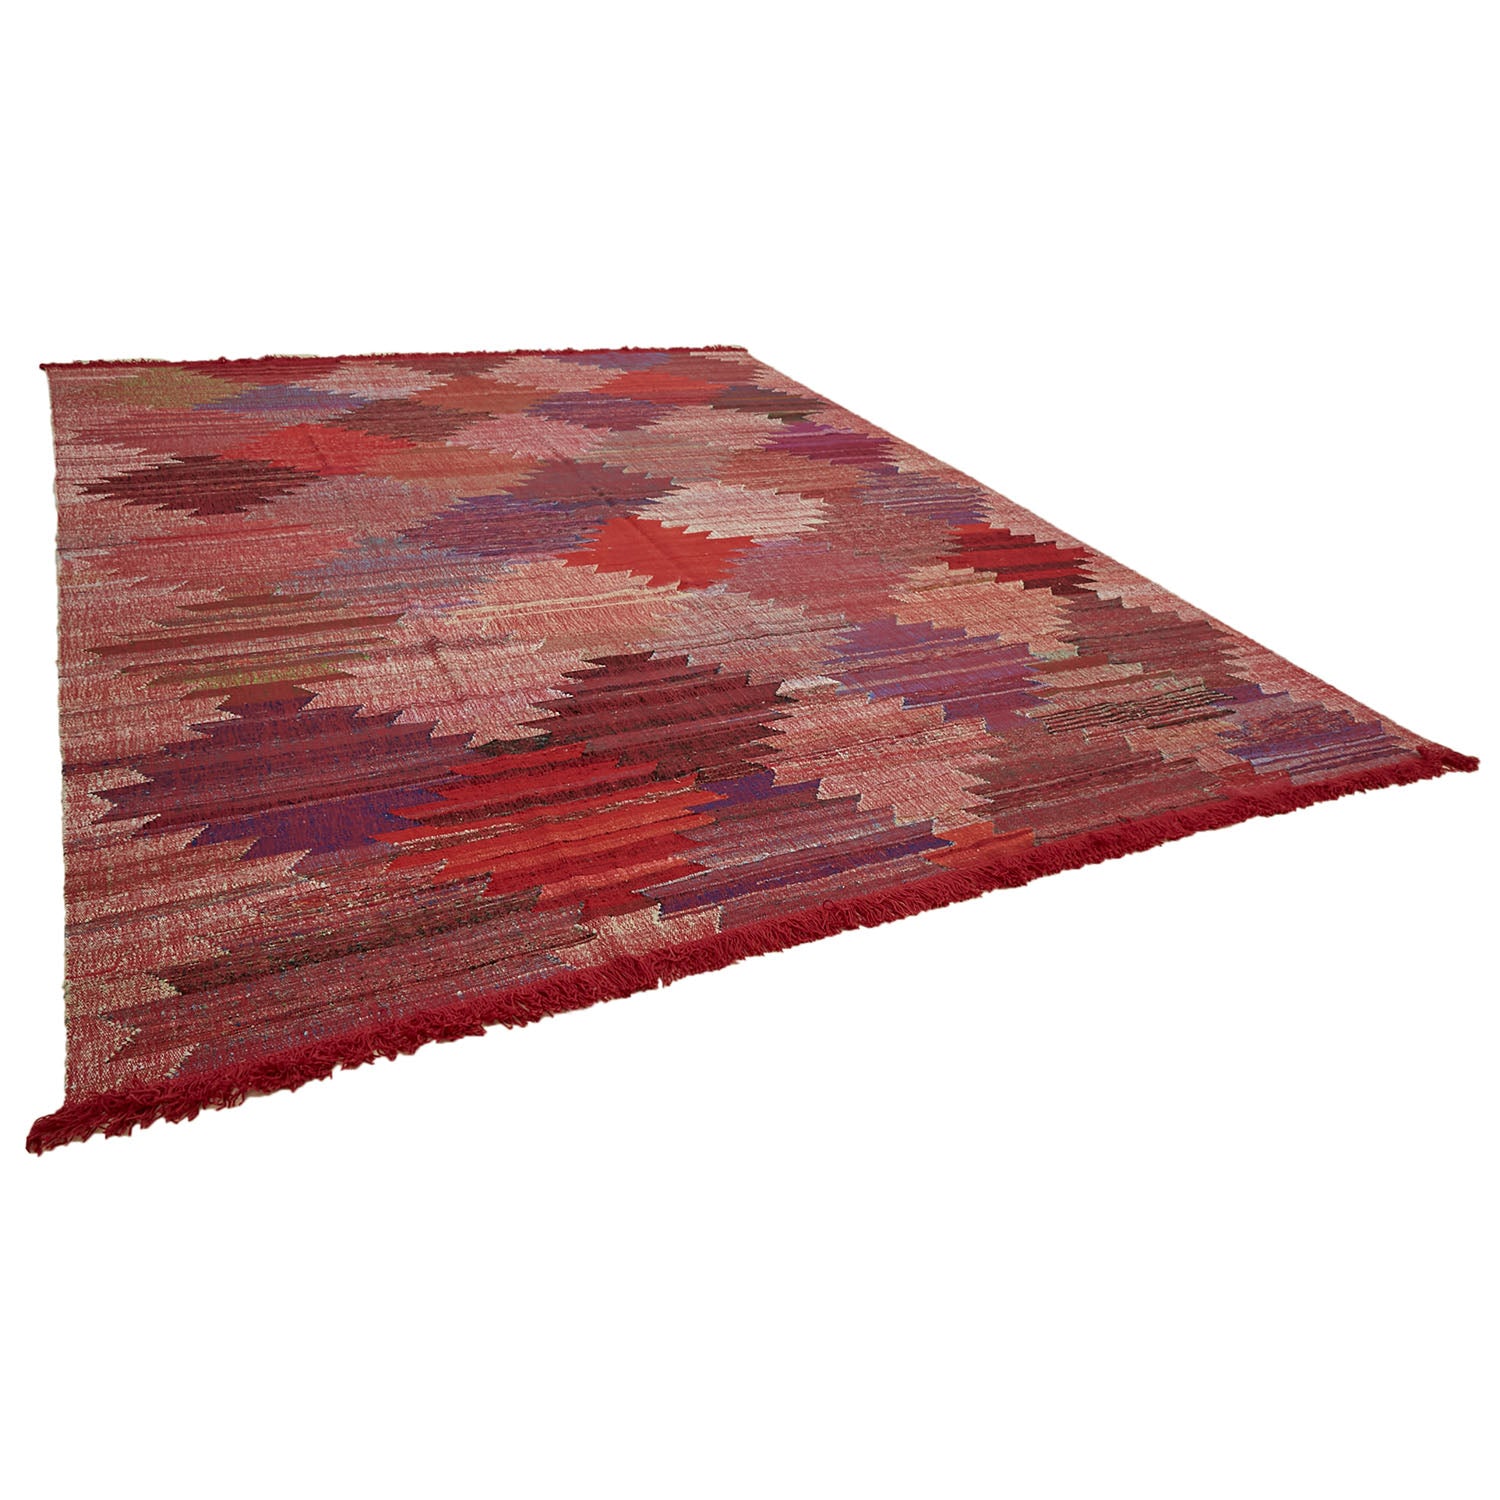 Colorful, abstract rug with irregular edges and artisanal fringe detail.